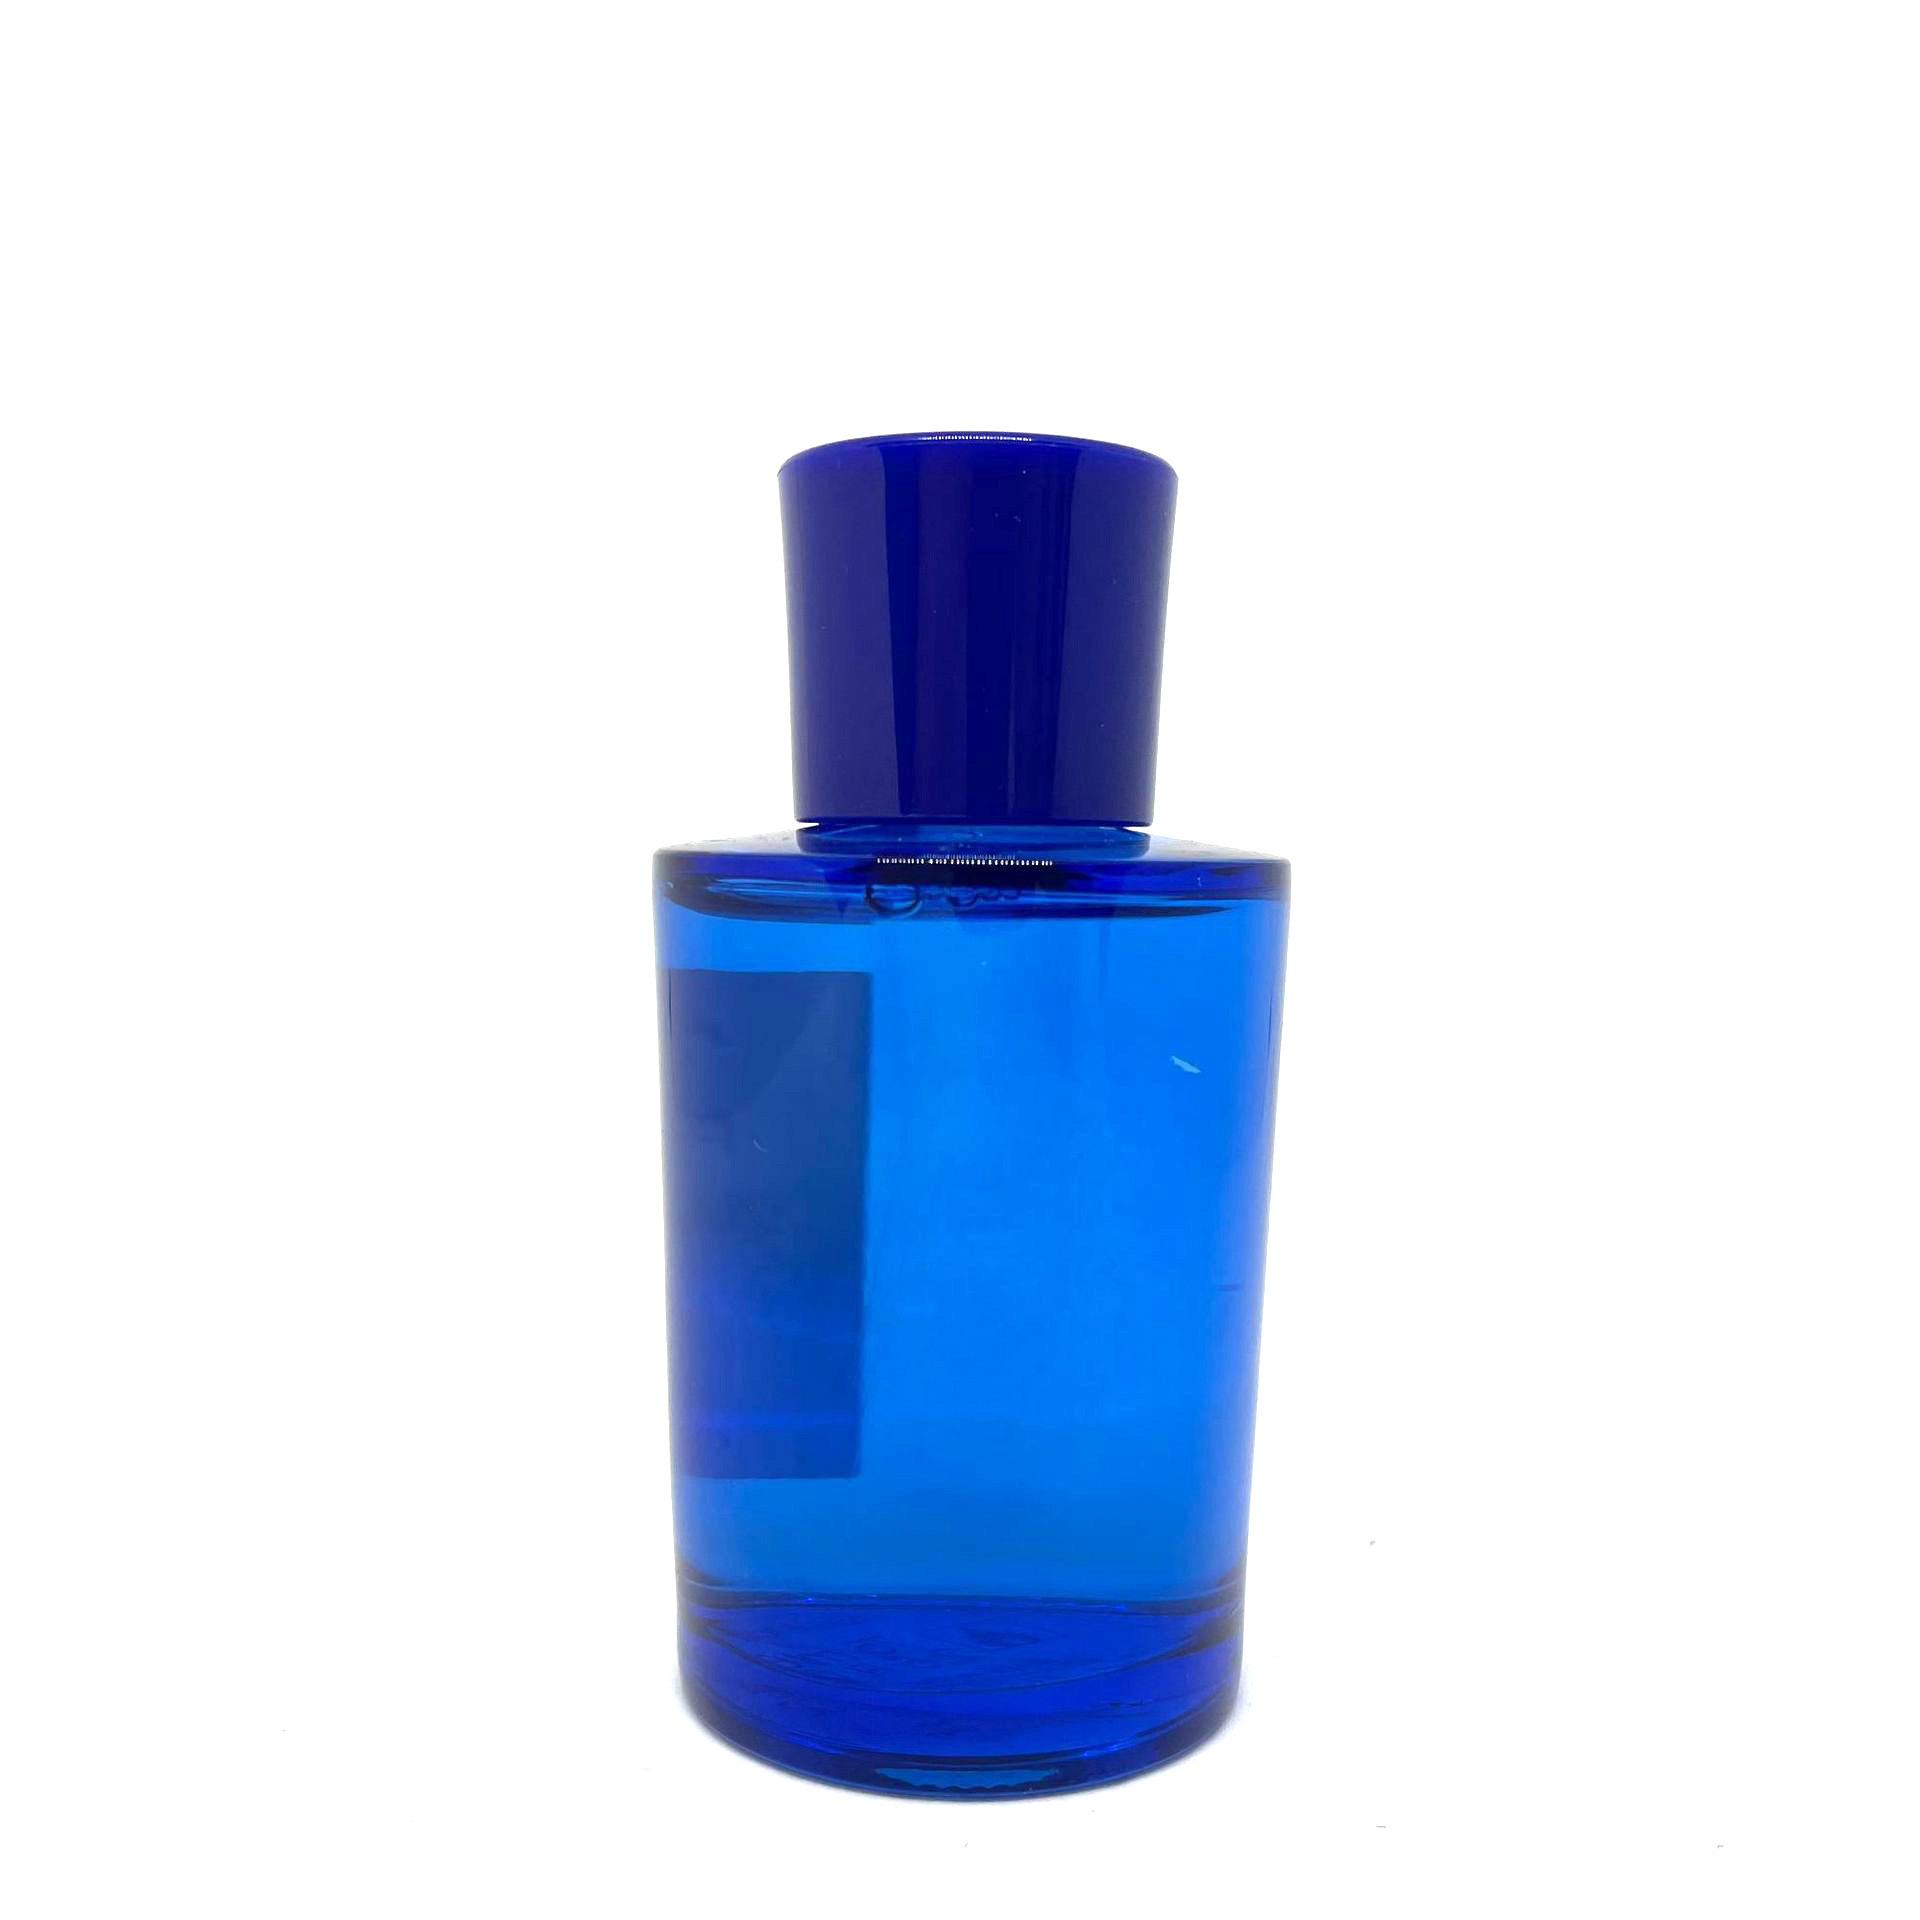  50ml 100ml Perfume Glass Bottle Boutique Round Manufacturer Wholesale Packaging Empty Bottles Separate Bottles Manufactures